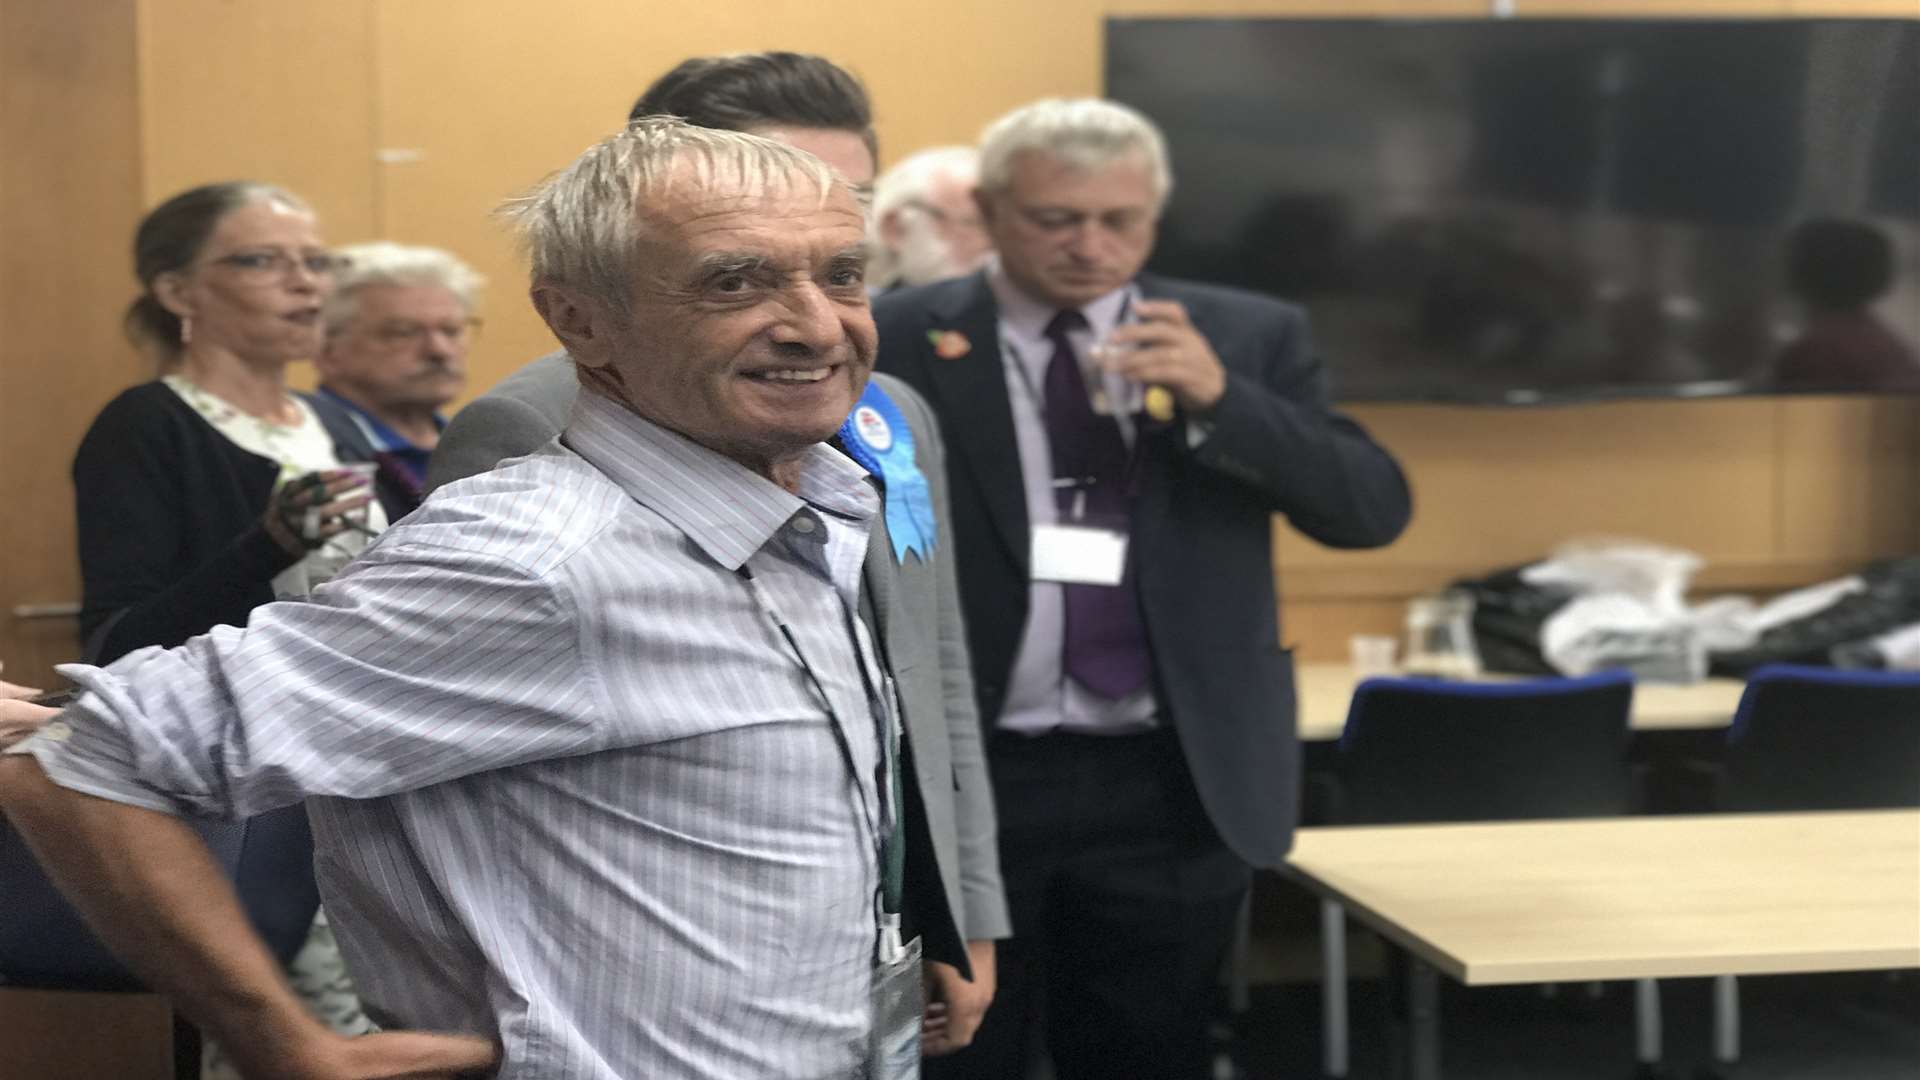 Tony Winckless wins the seat for Labour